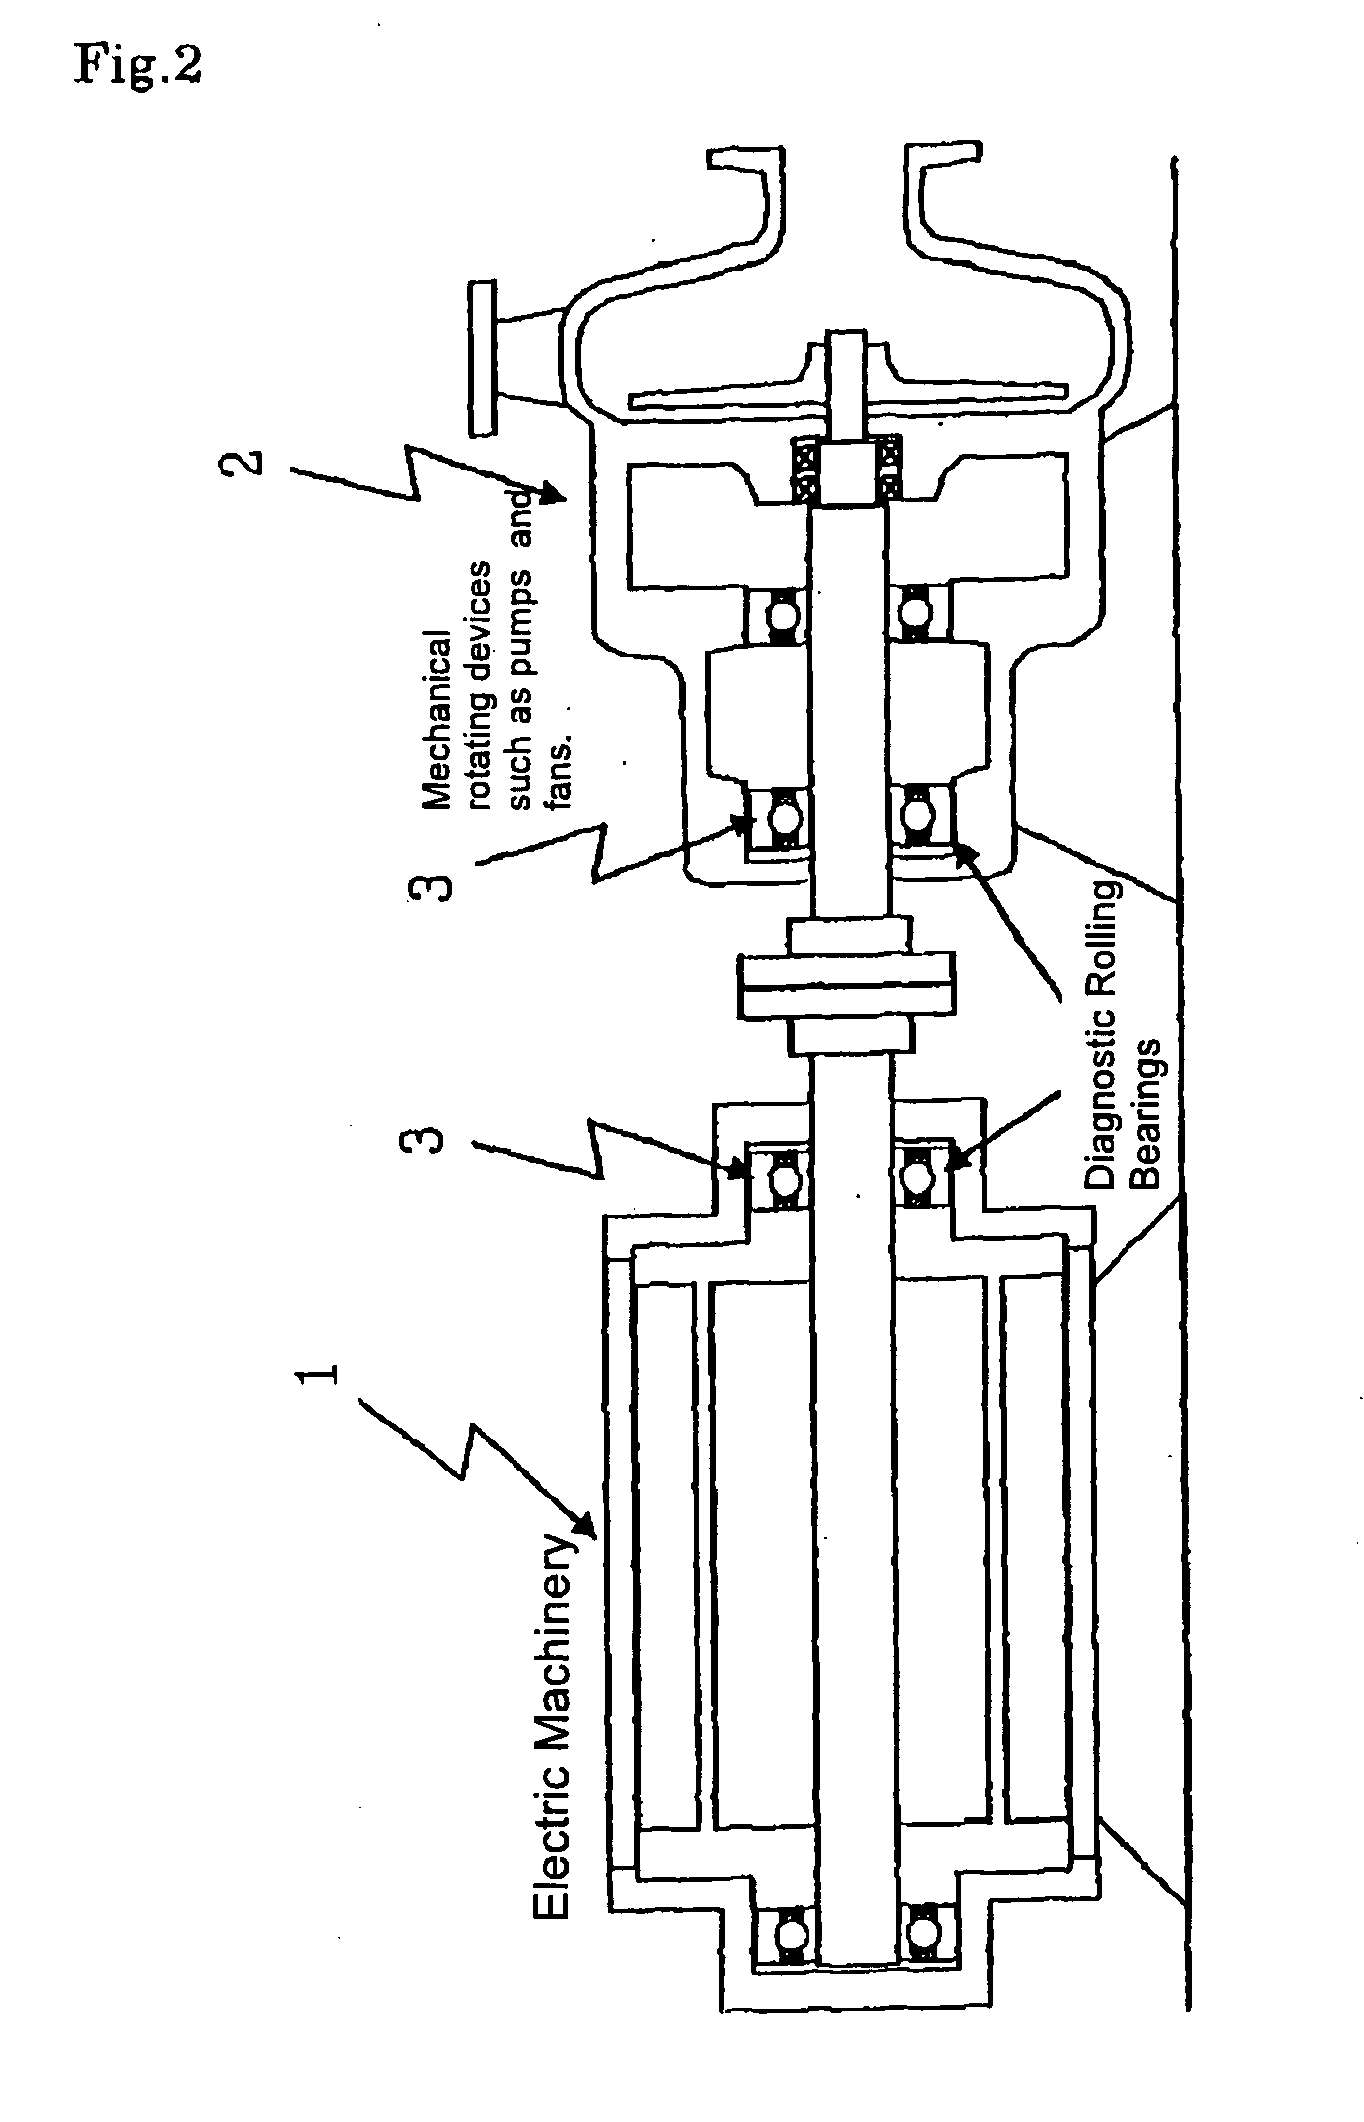 Method and apparatus for diagnosing residual life of rolling element bearing